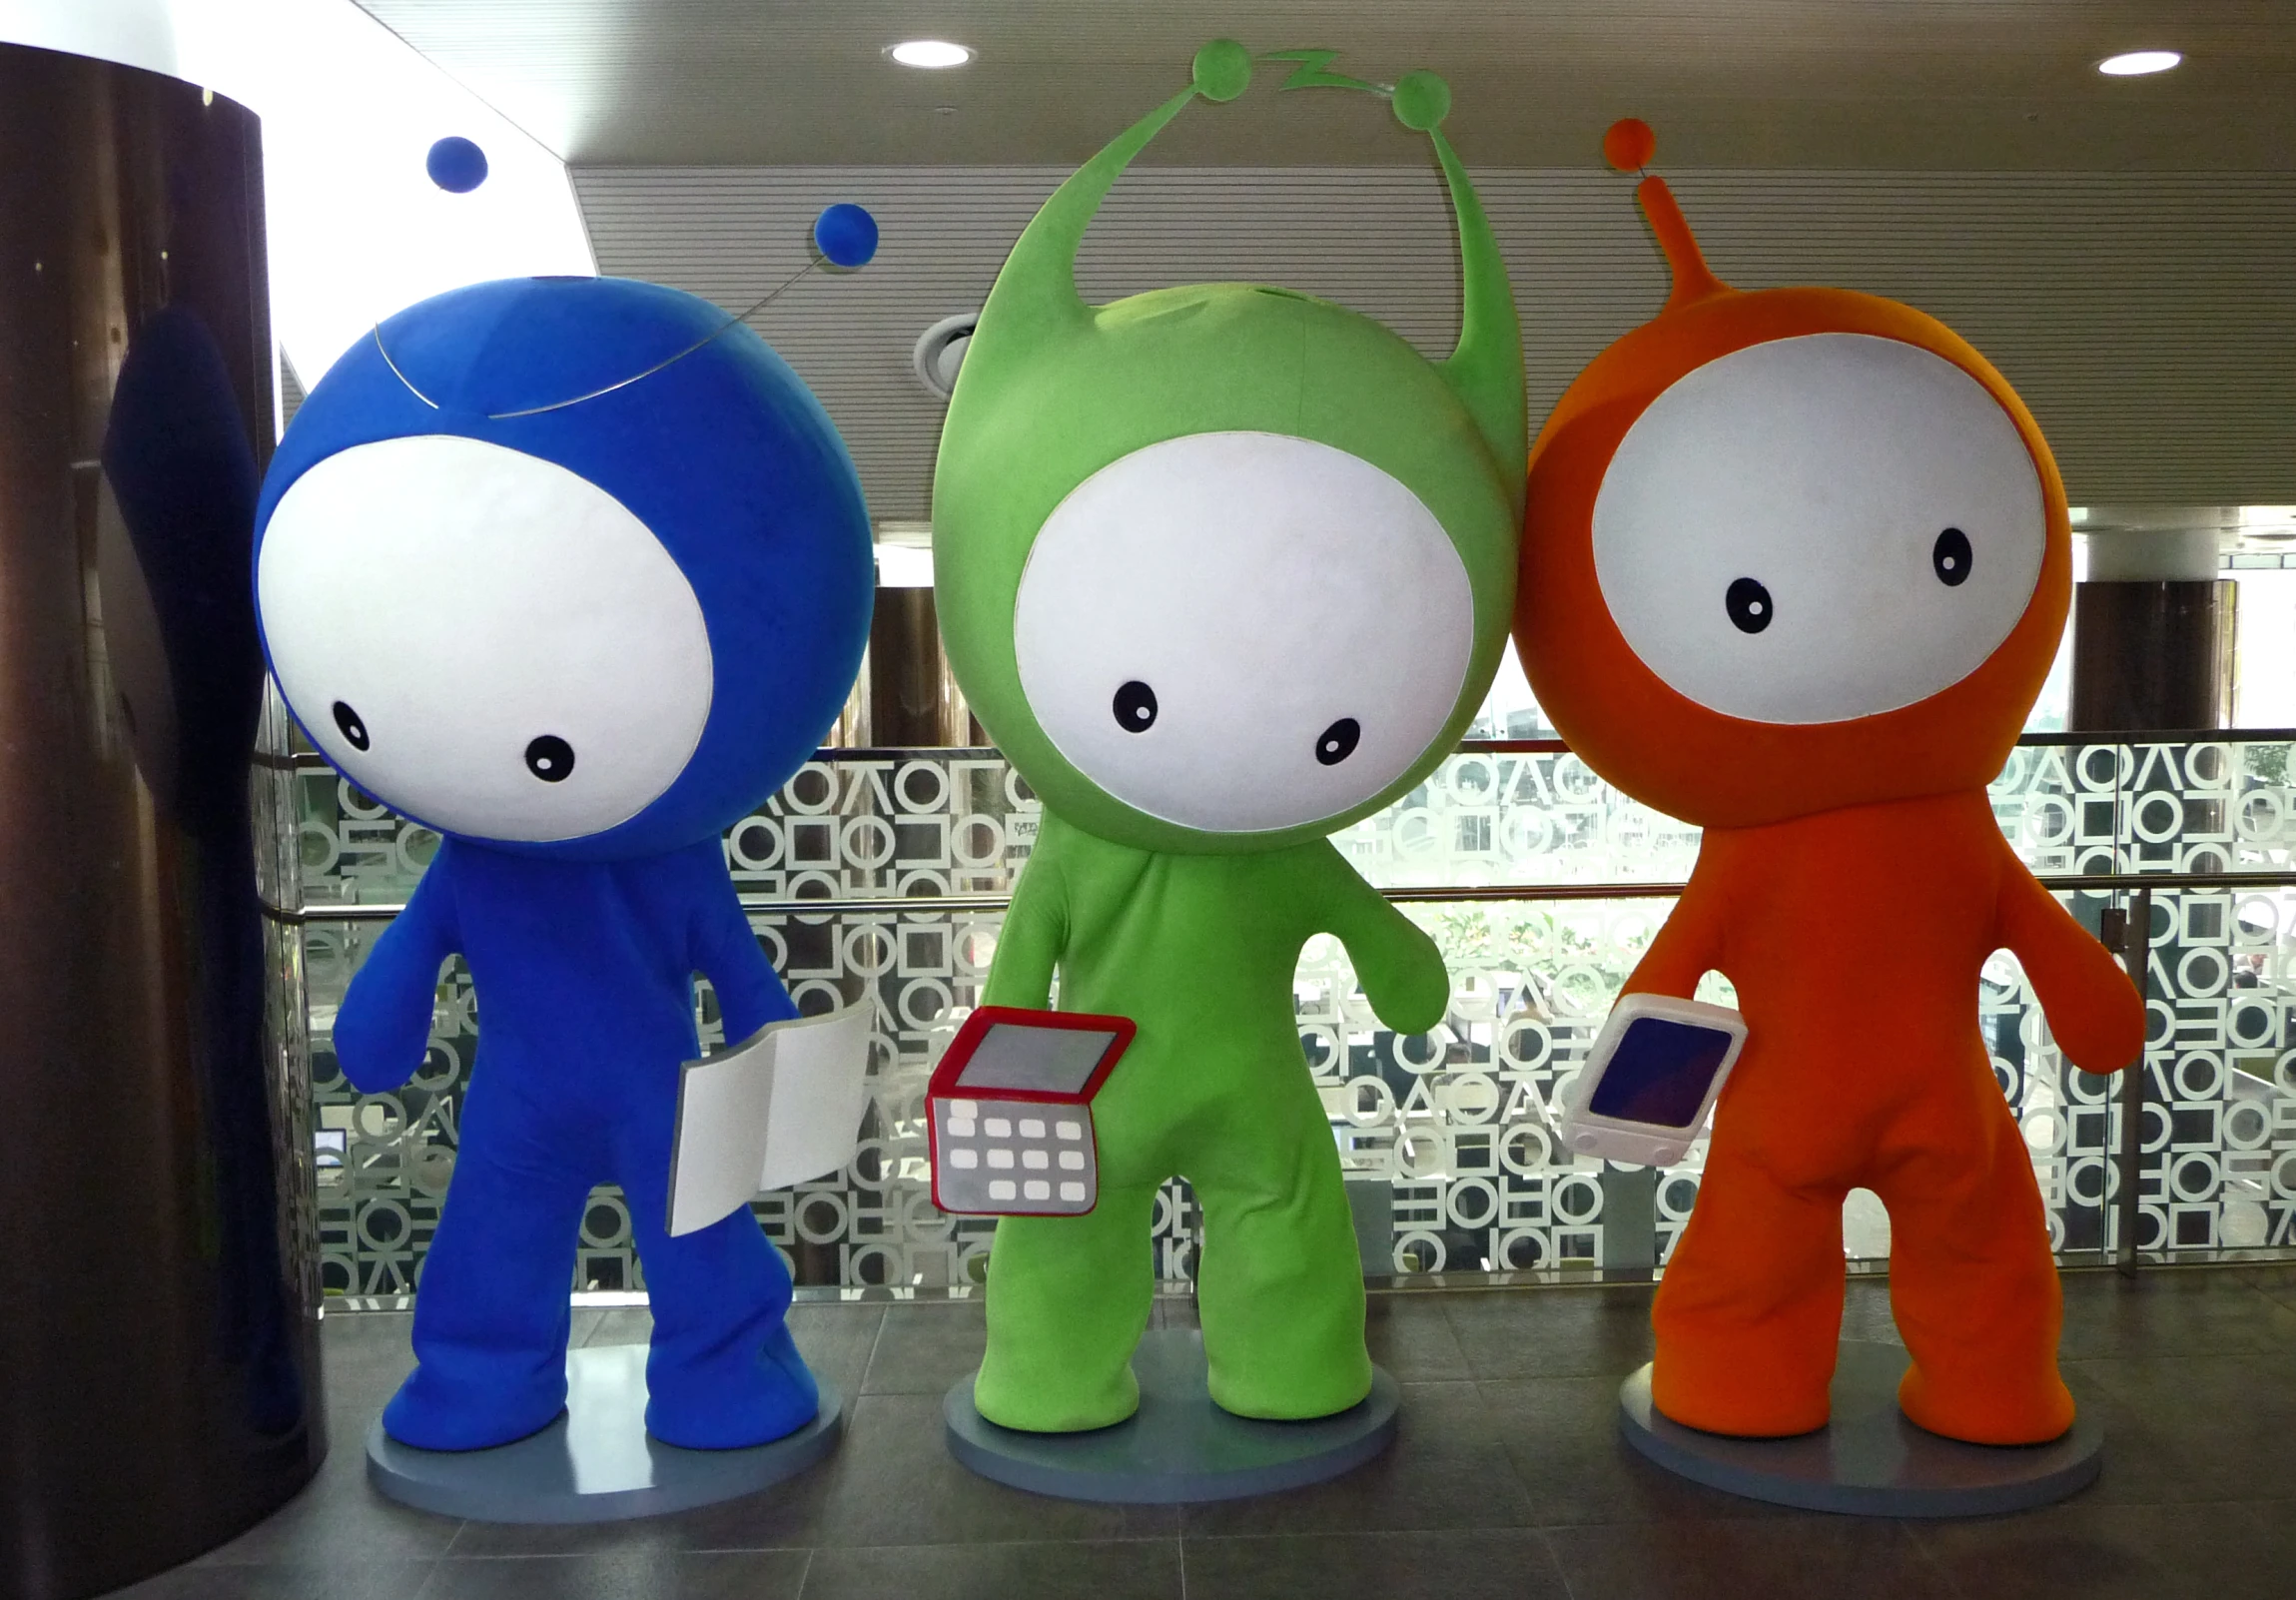 three toy character sculptures sit on a shelf